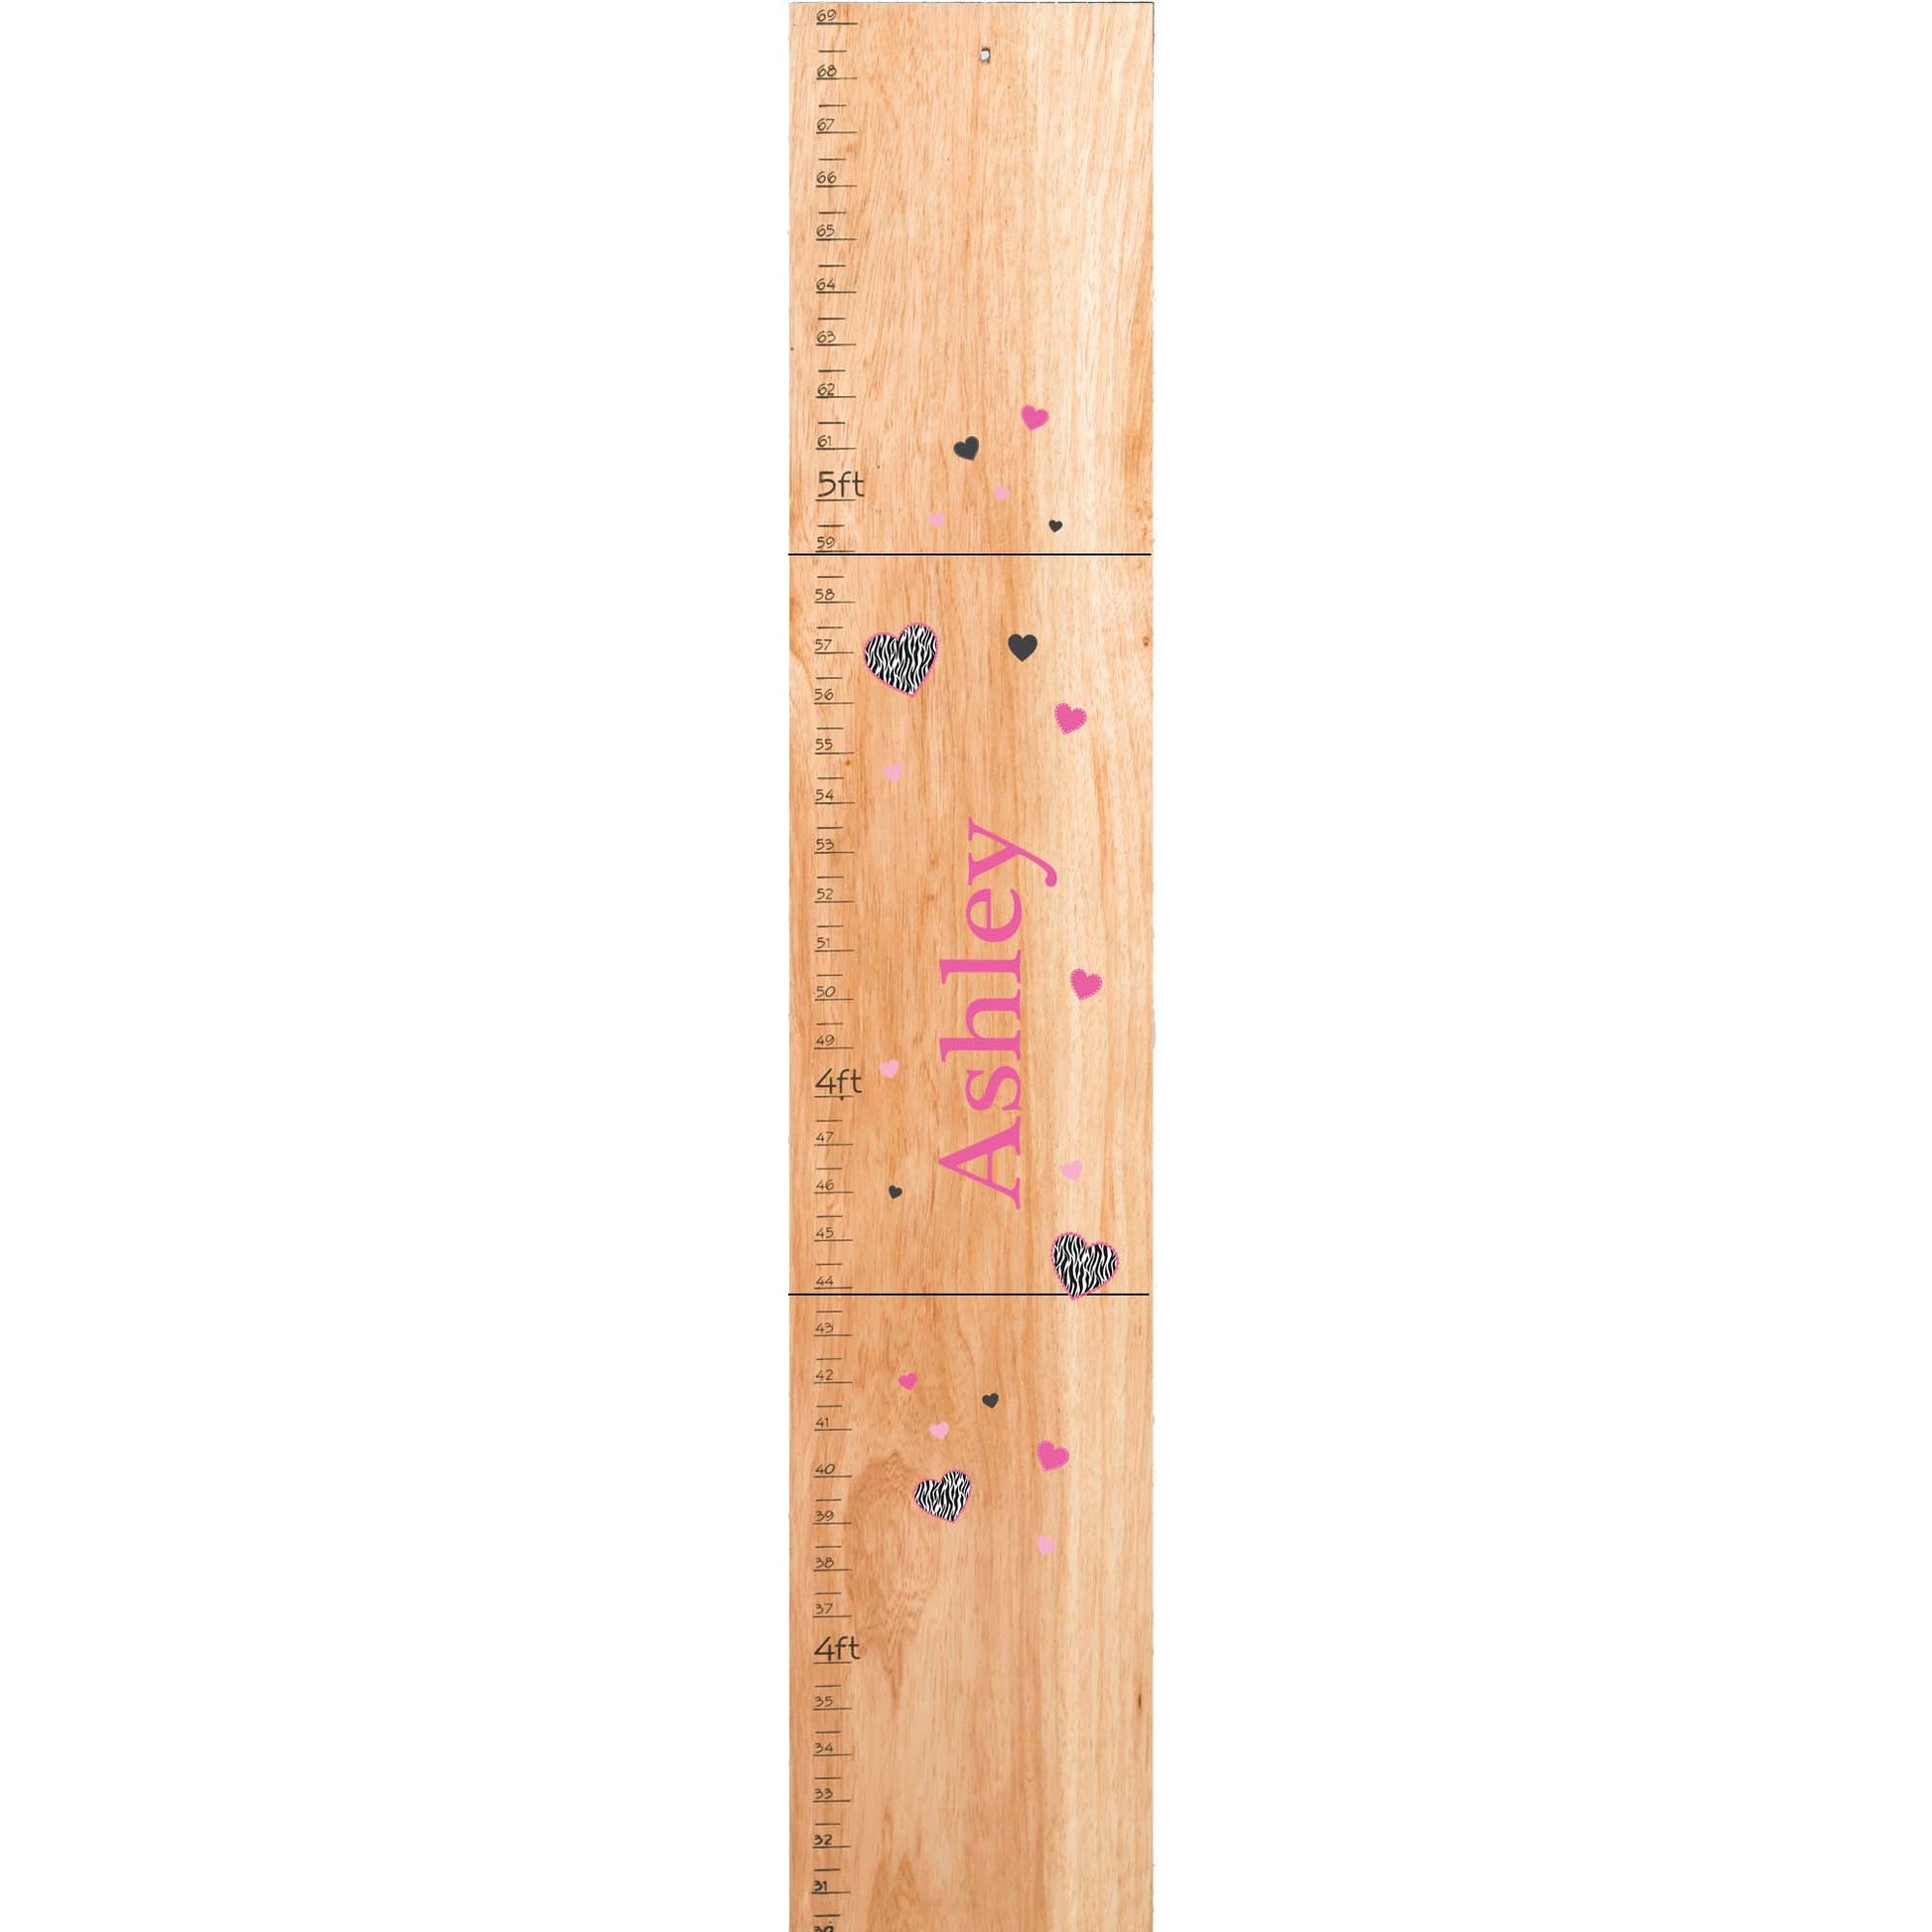 Personalized Natural Growth Chart With Sweet Treats Design